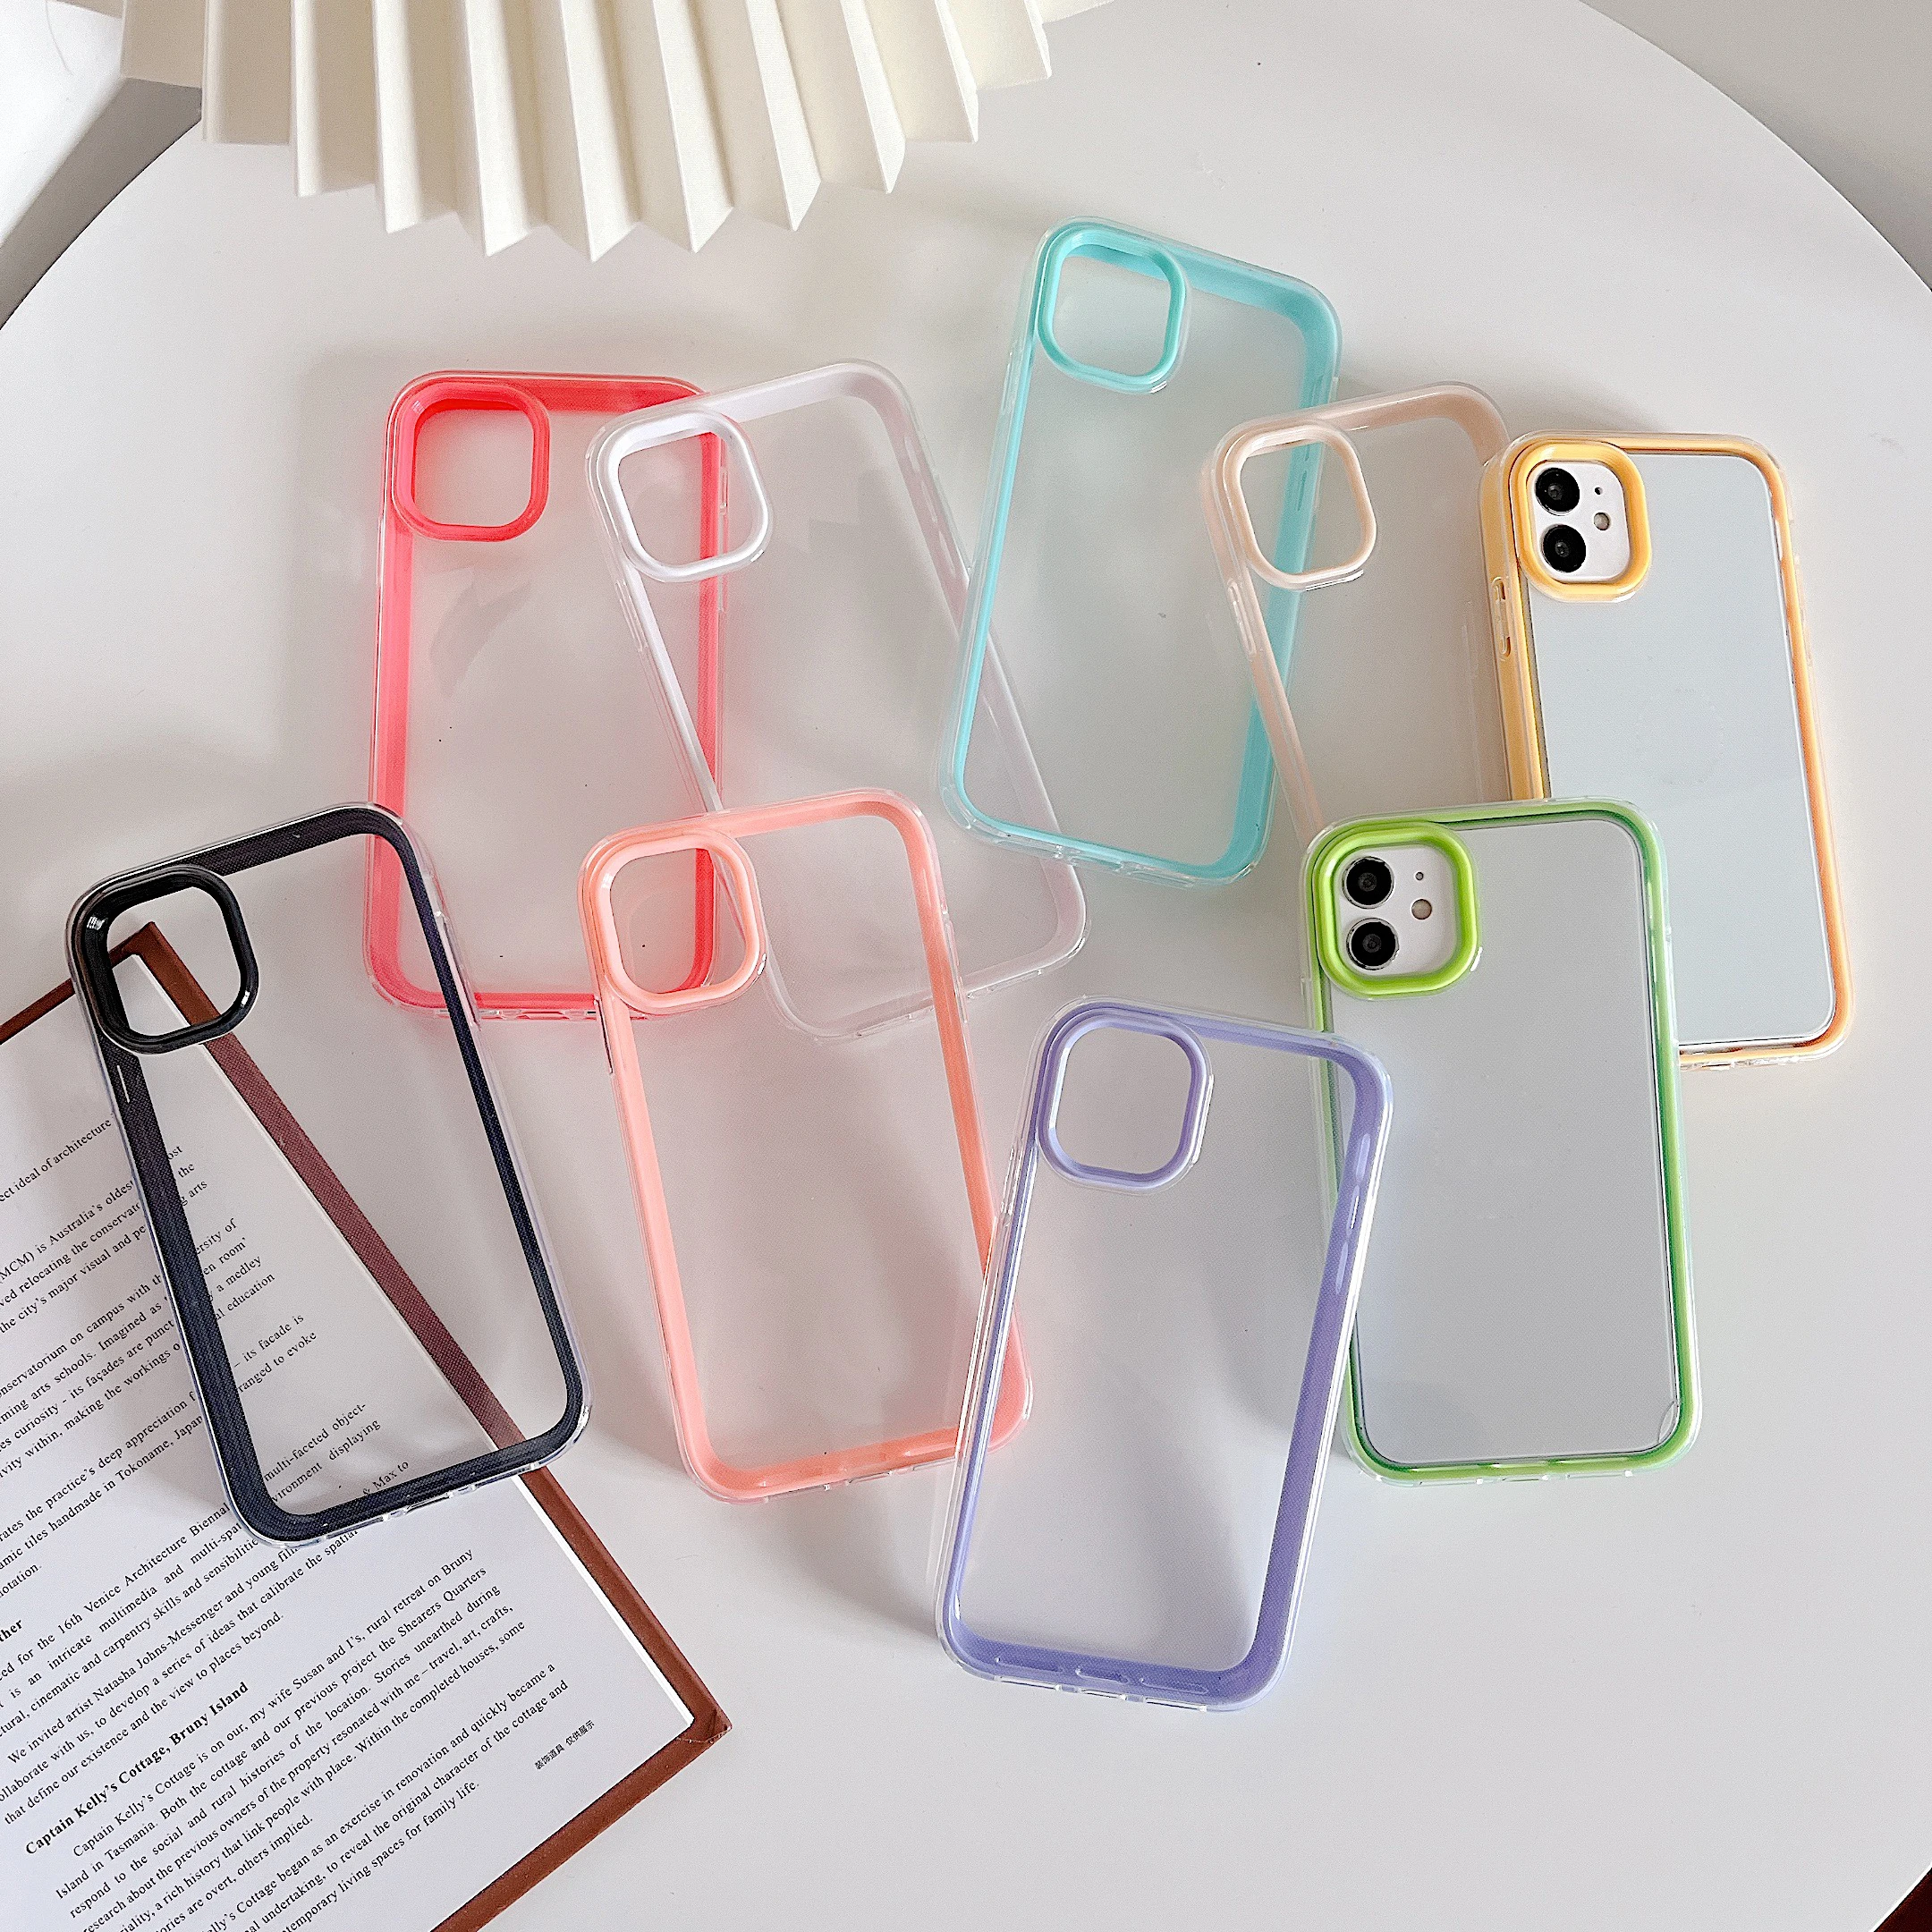 3 in 1 Transparent Silicone Case For iPhone 13 12 11 Pro Max чехол на айфон 11 Cheap Silicone Cover iPhone Funda Samsung Note 20